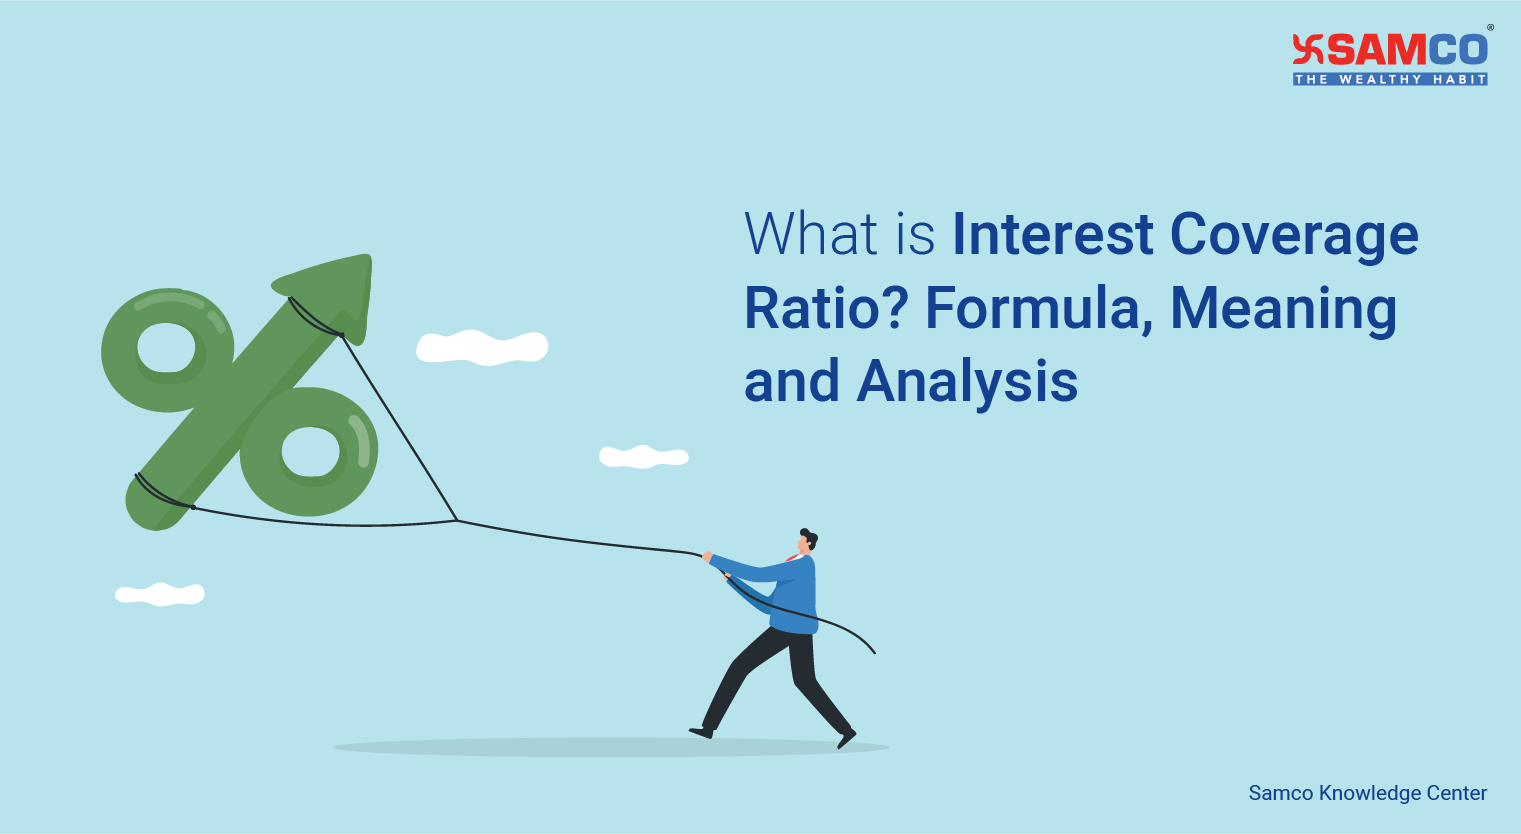 What is Interest Coverage Ratio? Formula, Meaning and Analysis